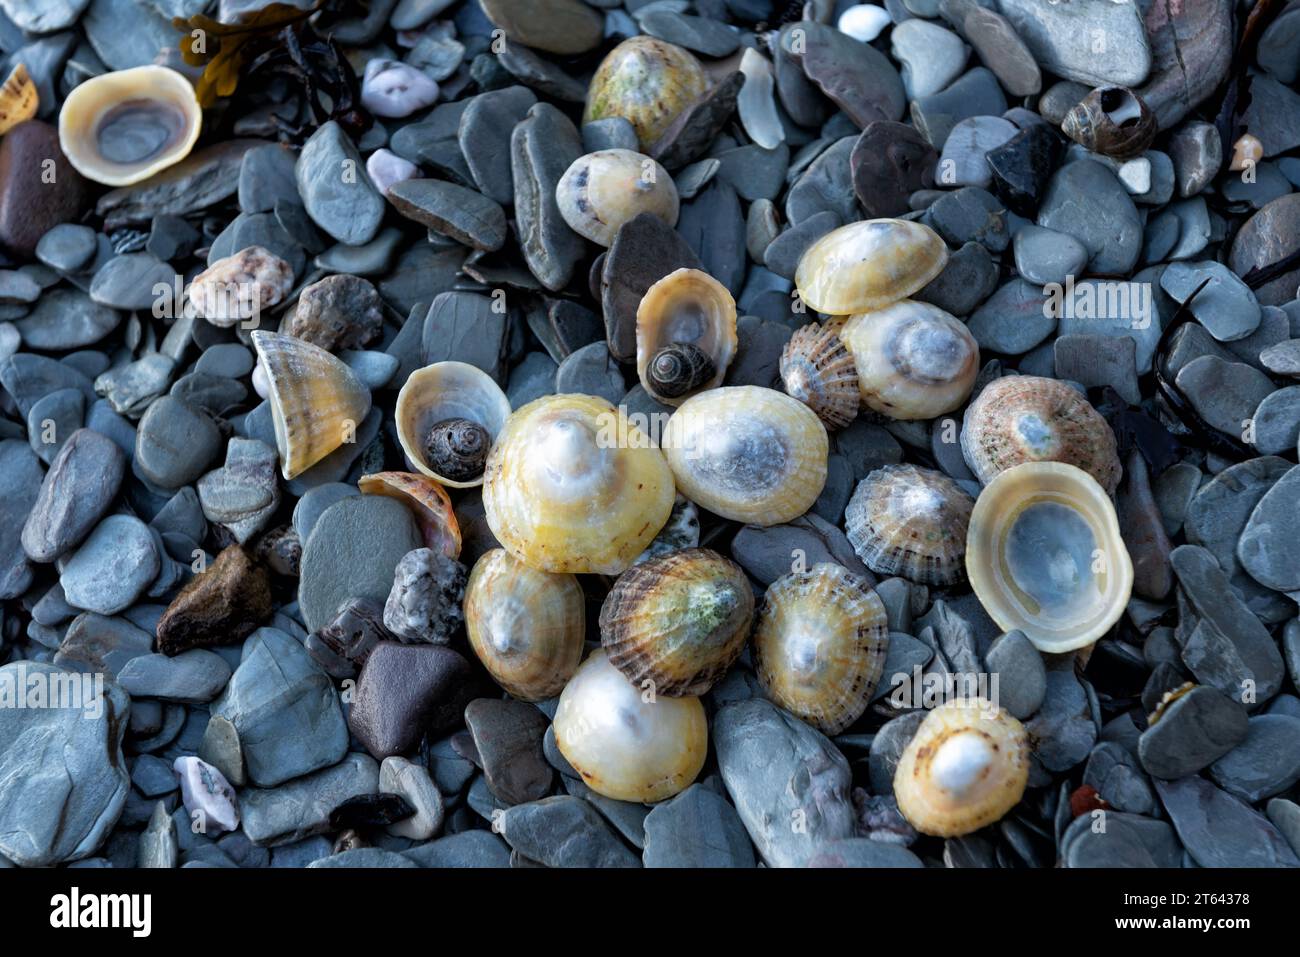 Shells of limpets and periwinkles on pebble beach Stock Photo